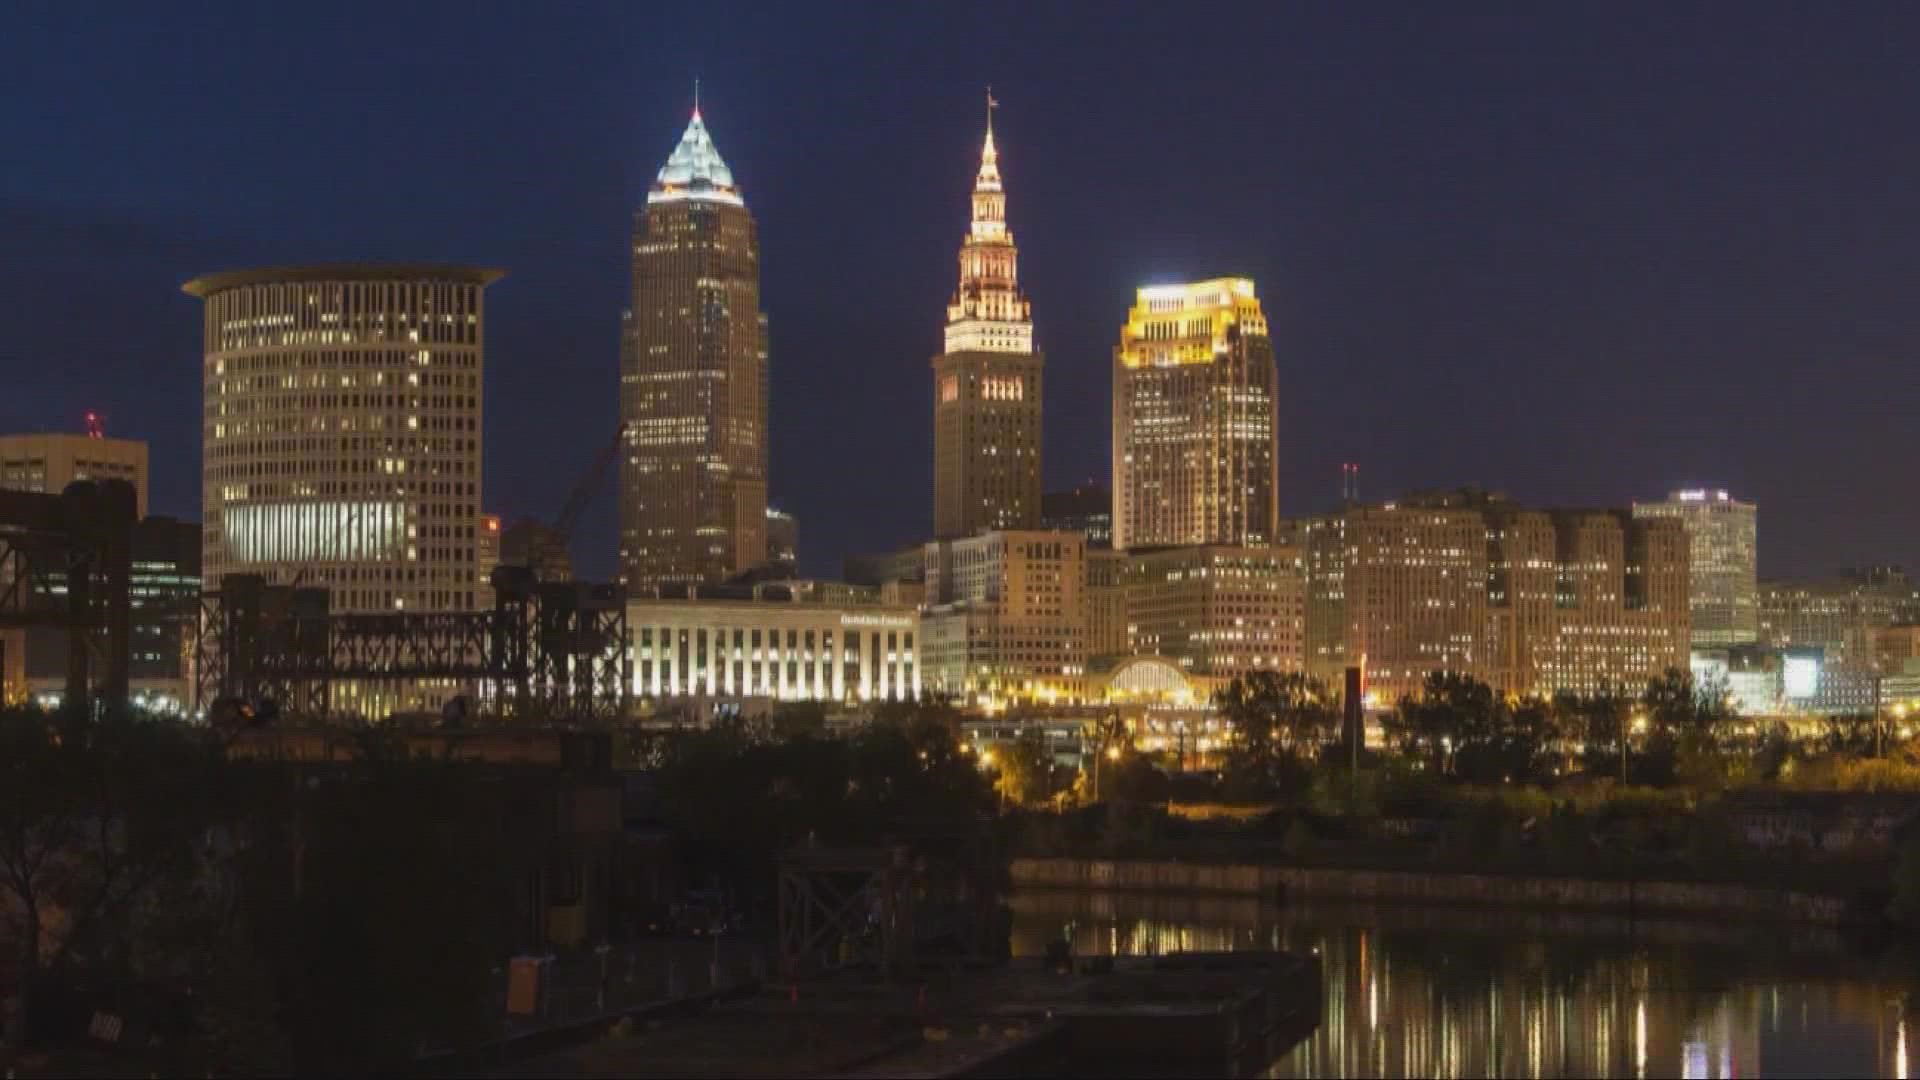 The iconic Cleveland skyscraper is nearly 100 years old and still a beacon of the city's skyline.